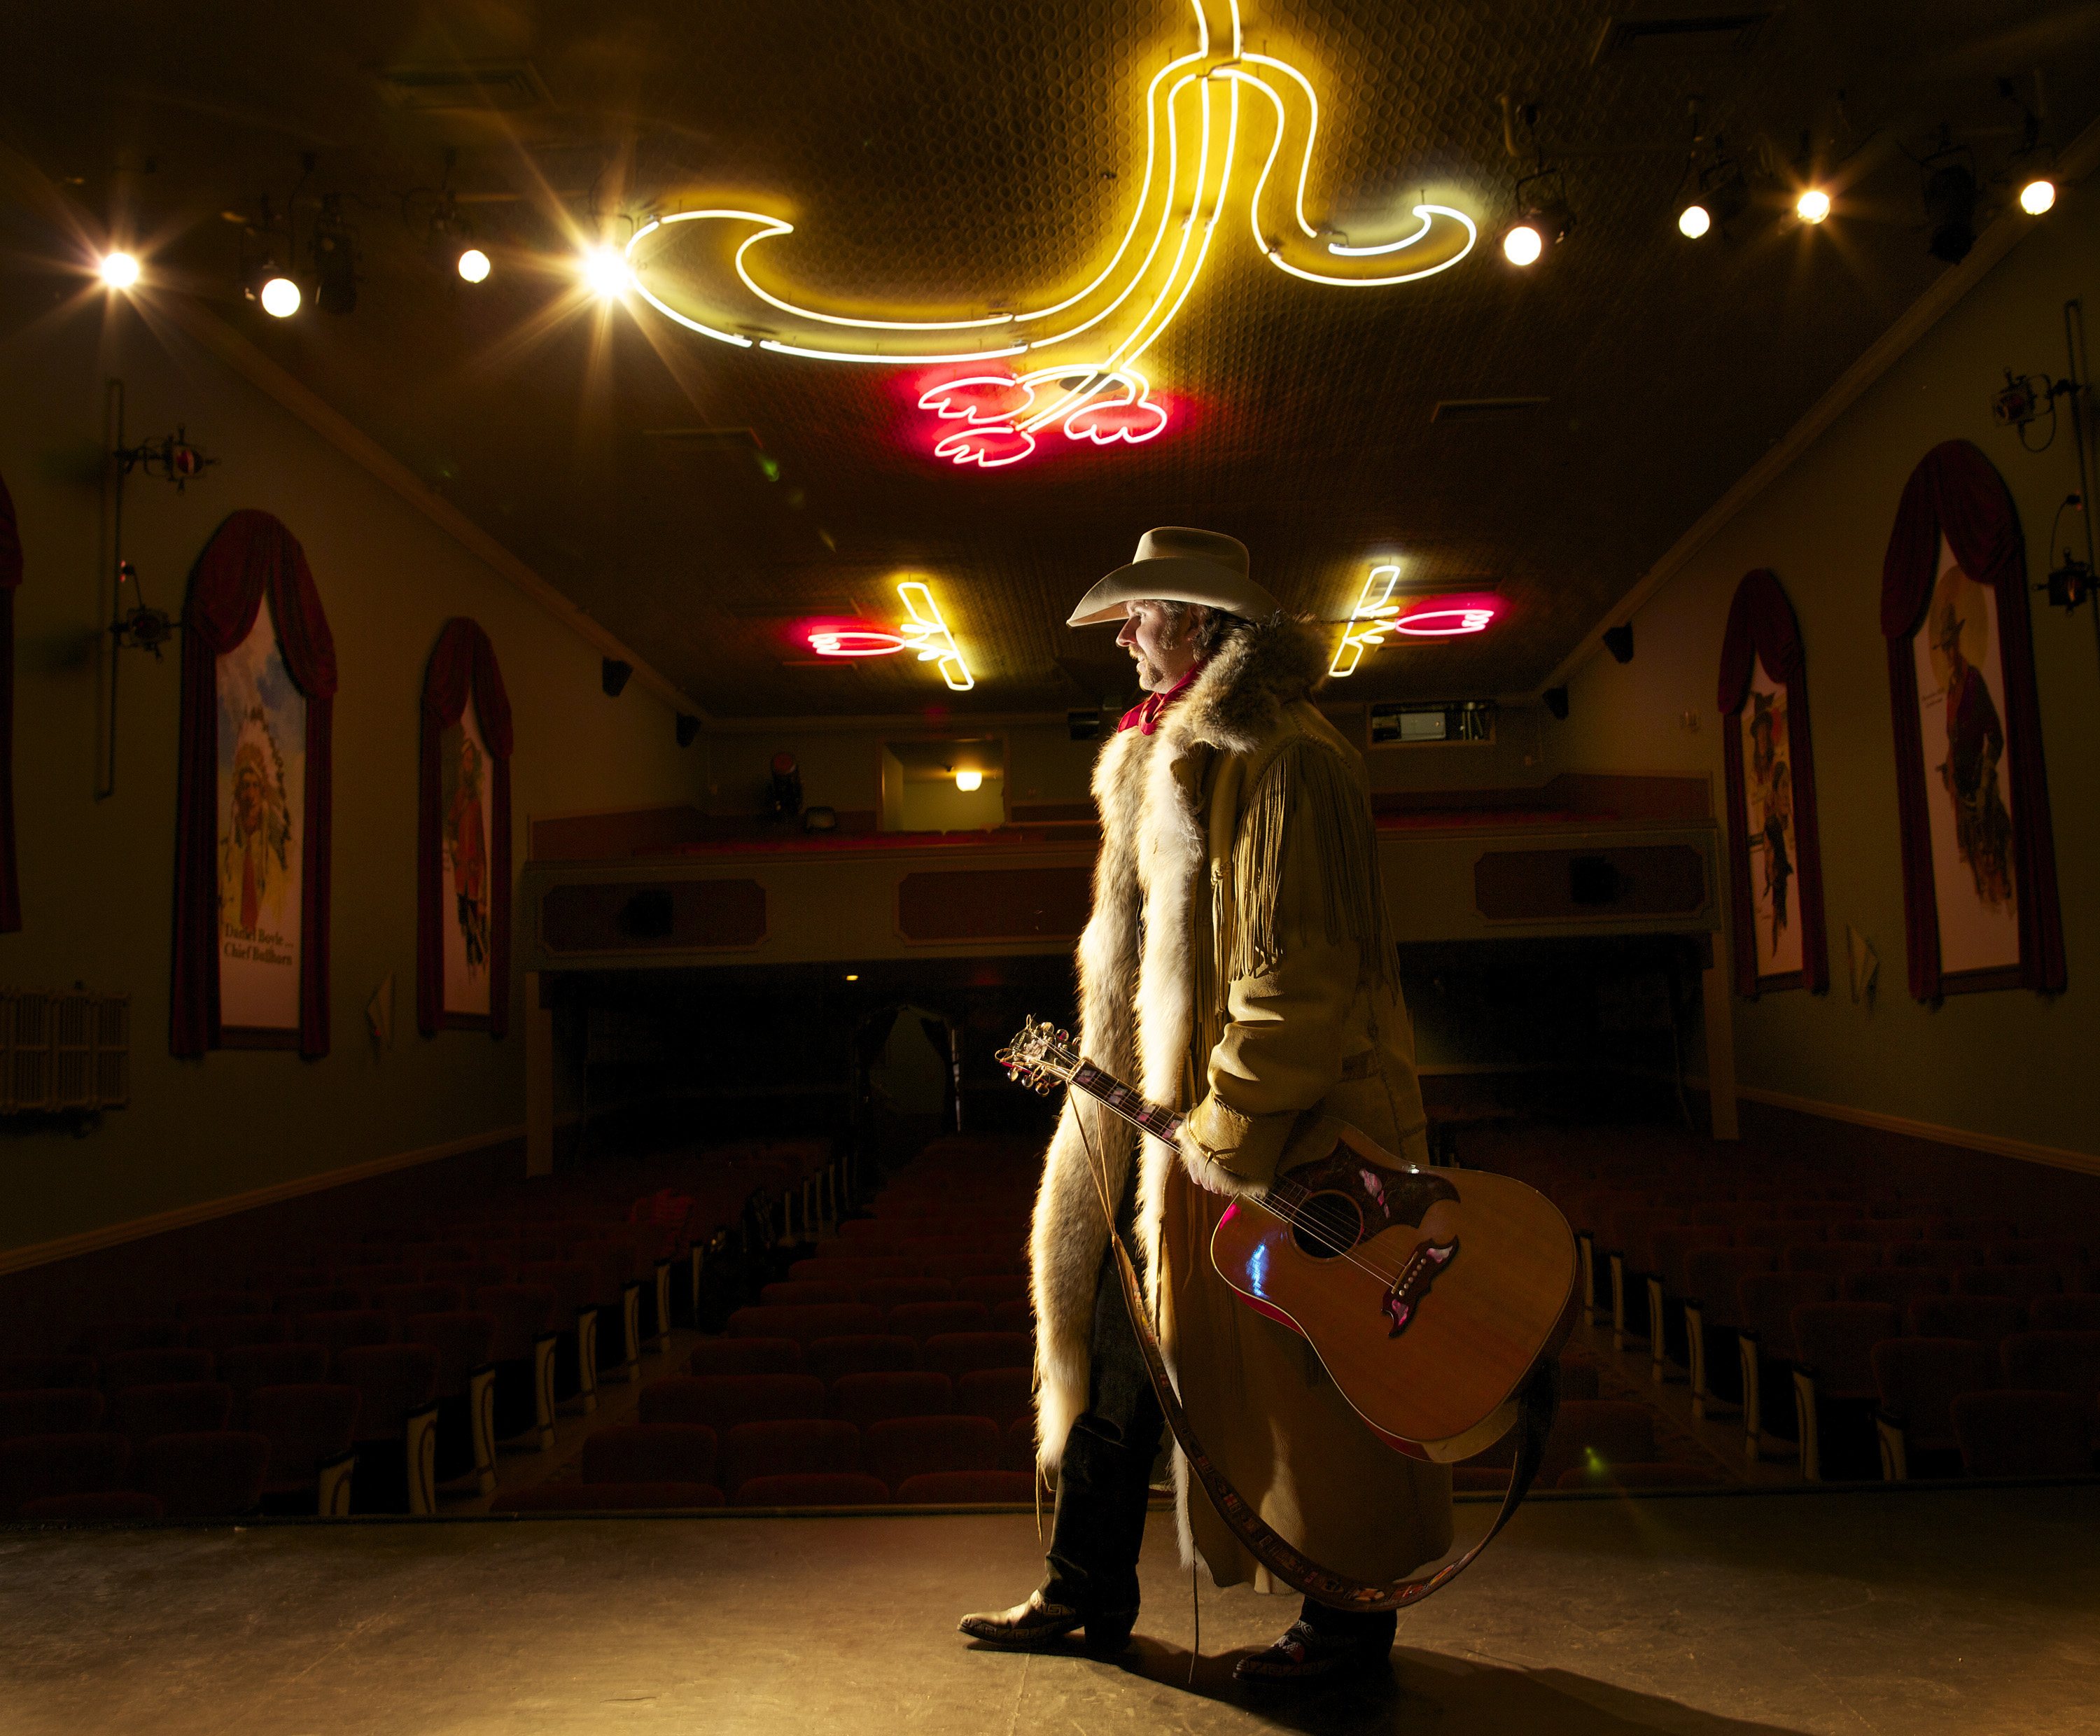 DOWN HOME - Canadian folk/country singer Tim Hus performs at The Hideout on Nov. 8.